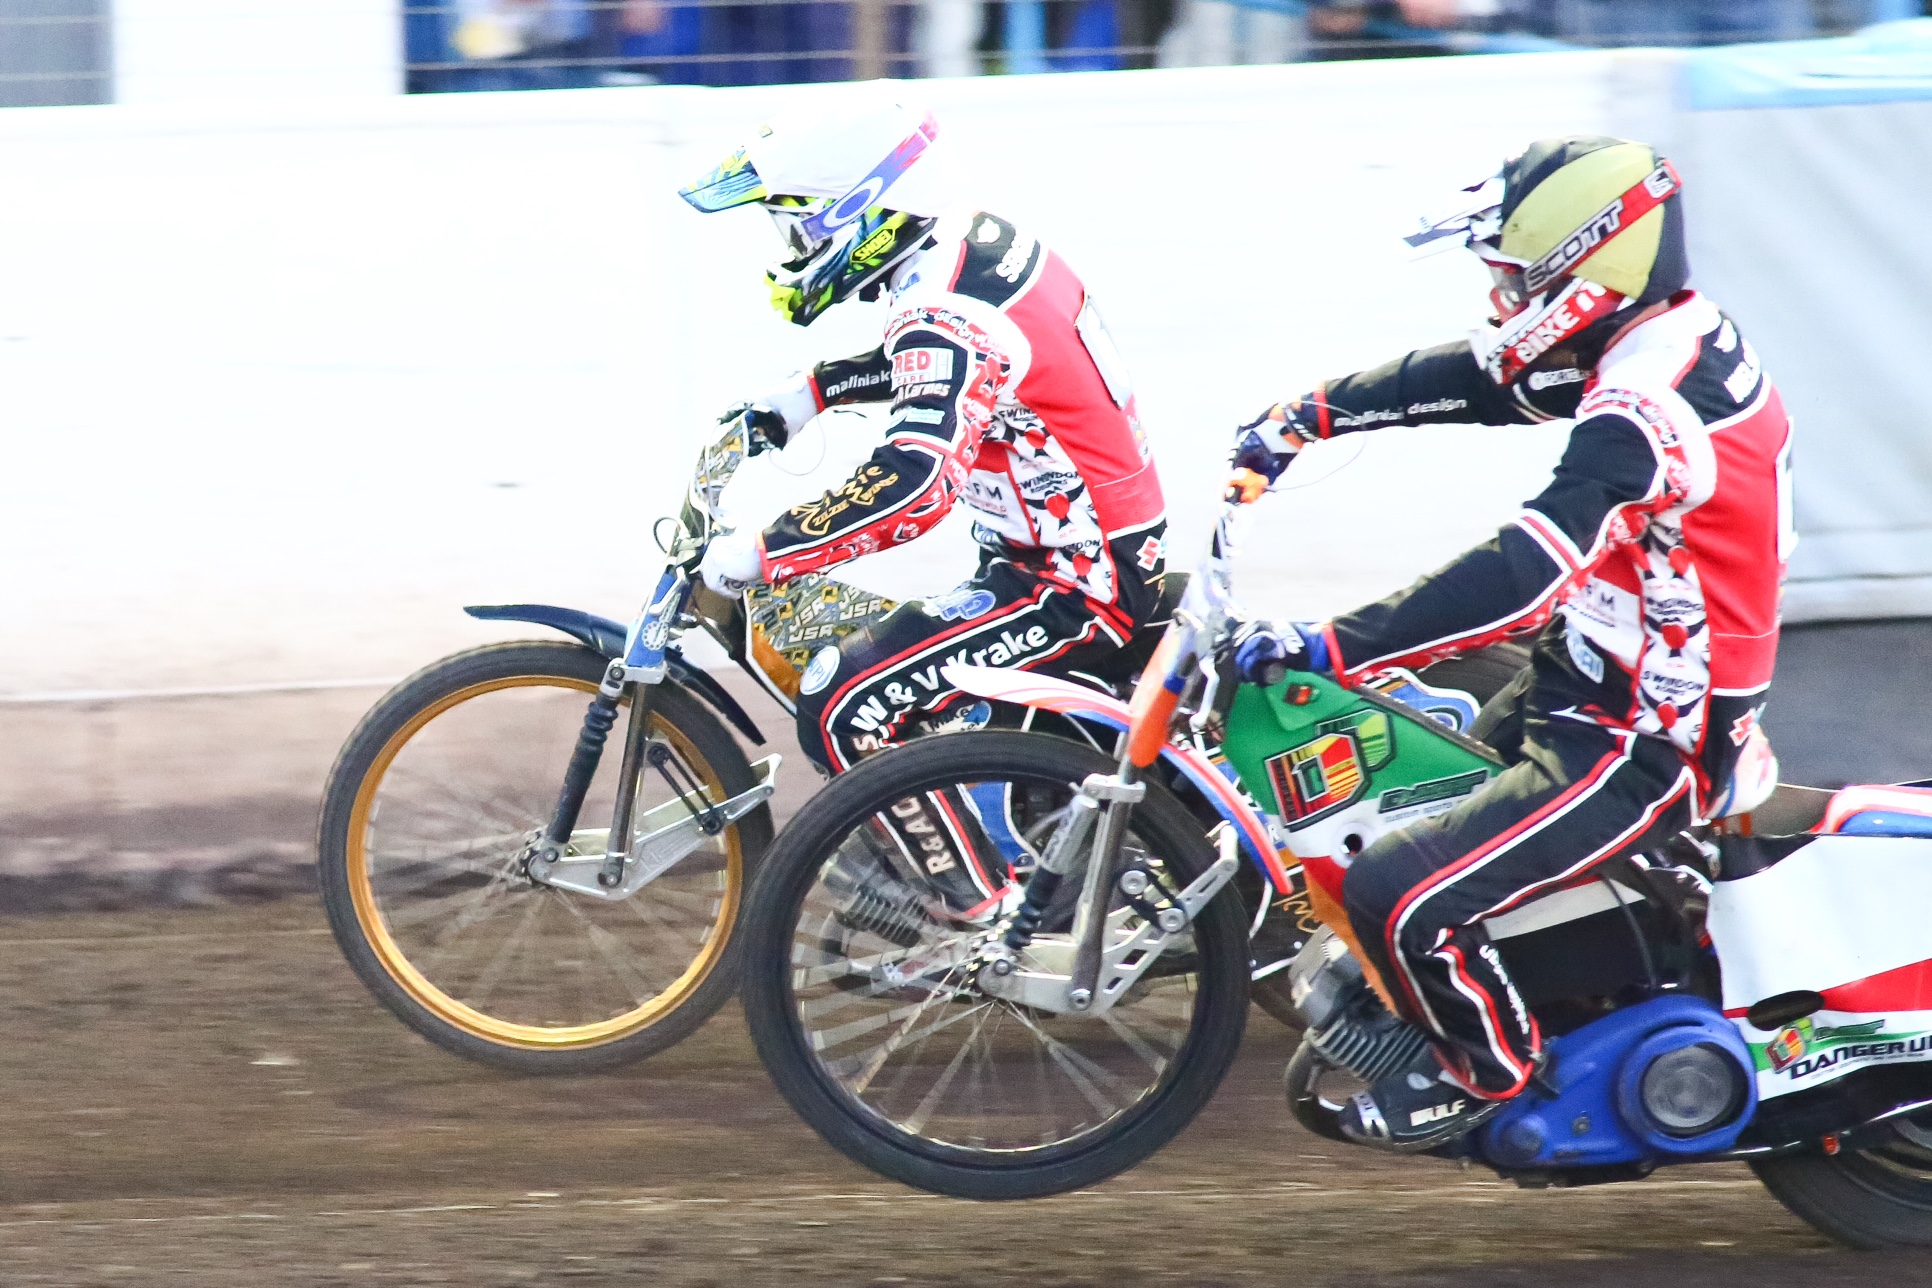 Leicester Lions' Davey Watt hails conquering of Rossiter's Robins